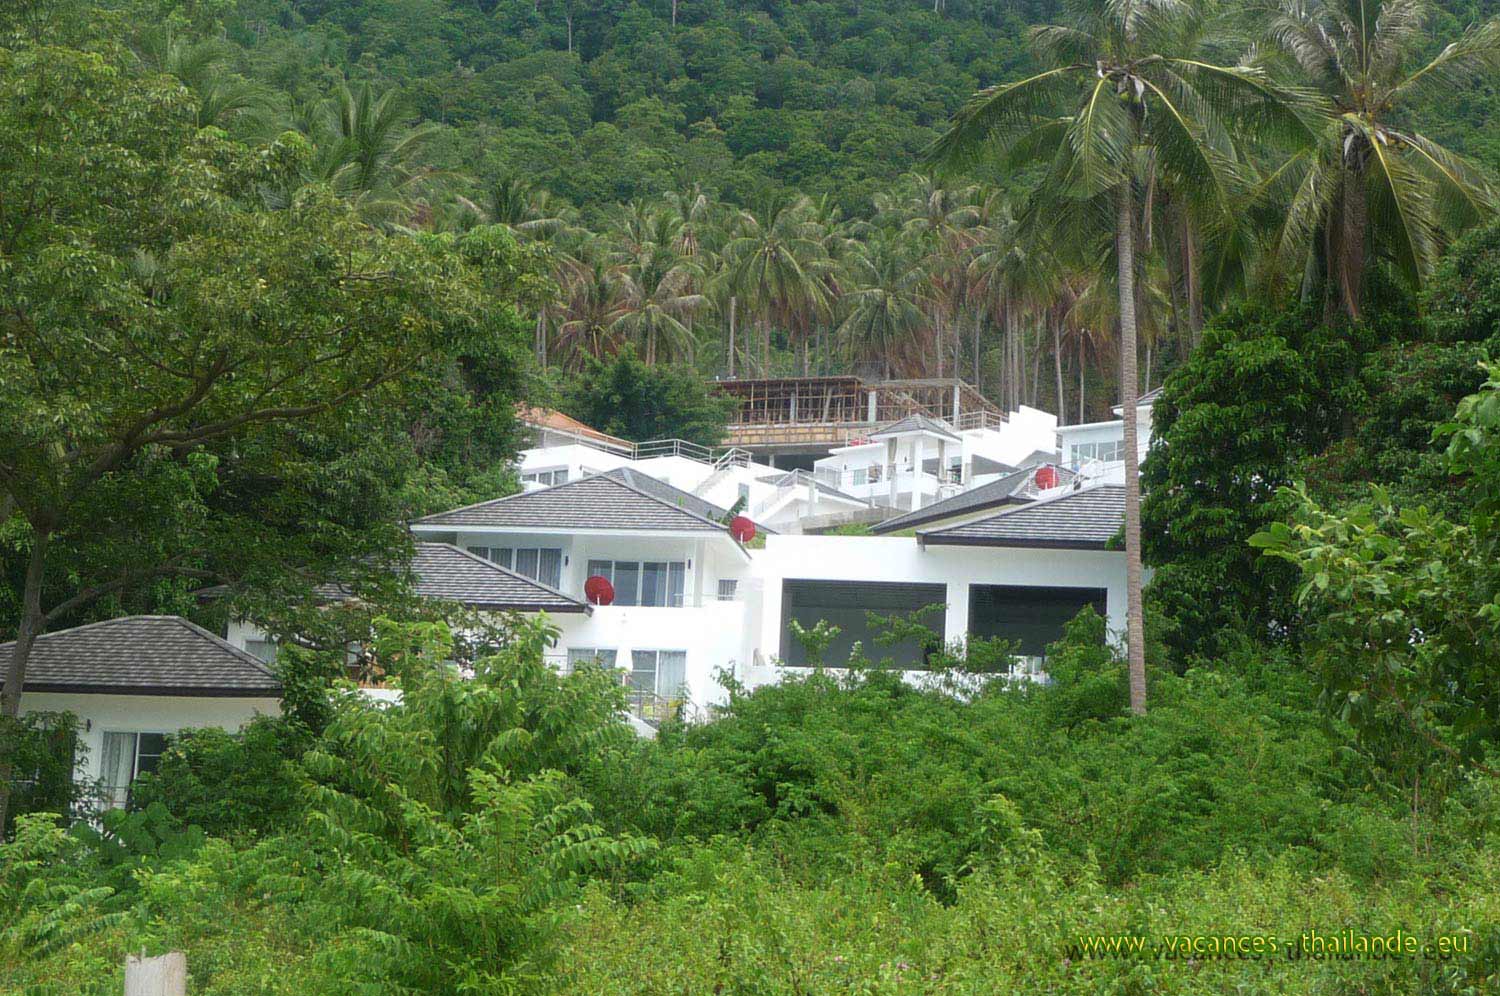 holiday-thailand, photo 22 home in the middle of the forest of coconut trees on the mountainside in Koh Samui Thailand